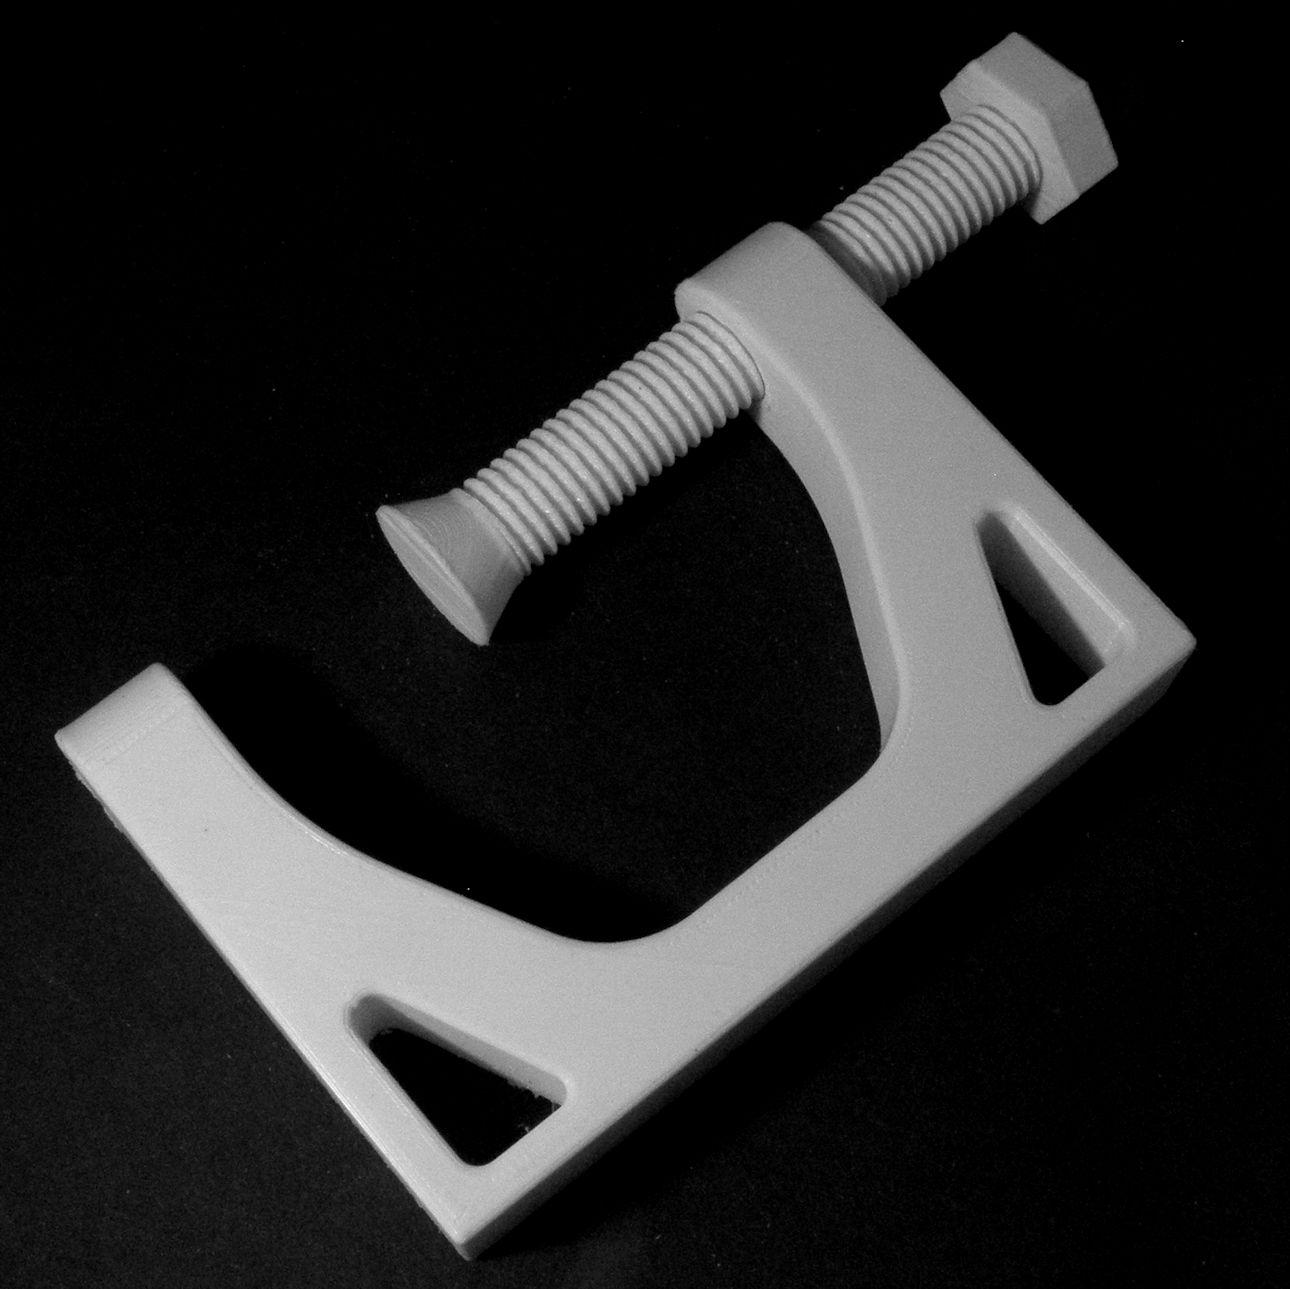 3D Printable 3 Inch Clamp by Arman Boyakhchyan